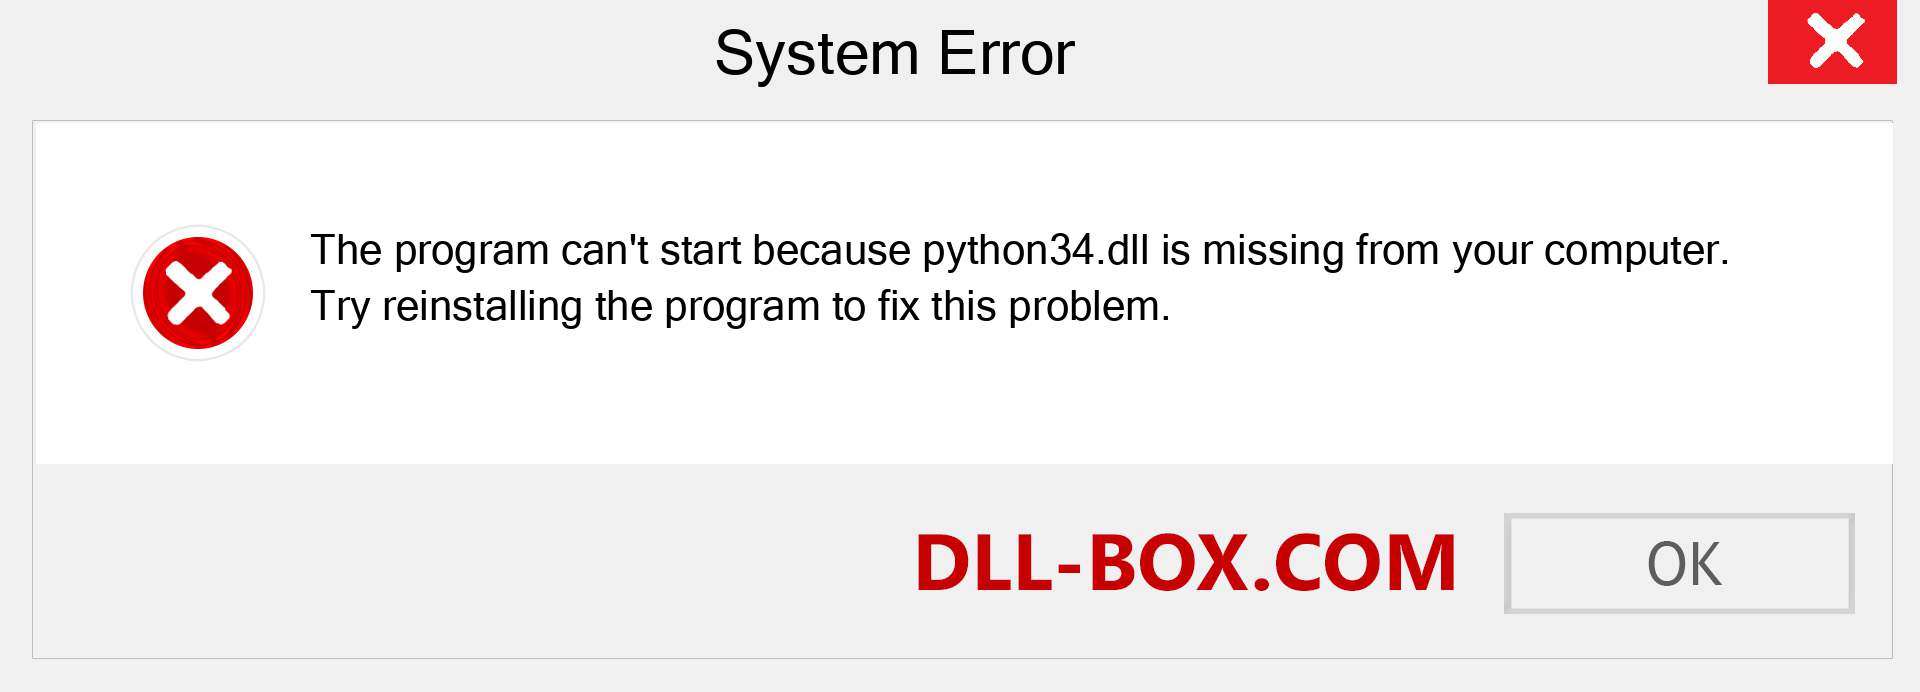  python34.dll file is missing?. Download for Windows 7, 8, 10 - Fix  python34 dll Missing Error on Windows, photos, images